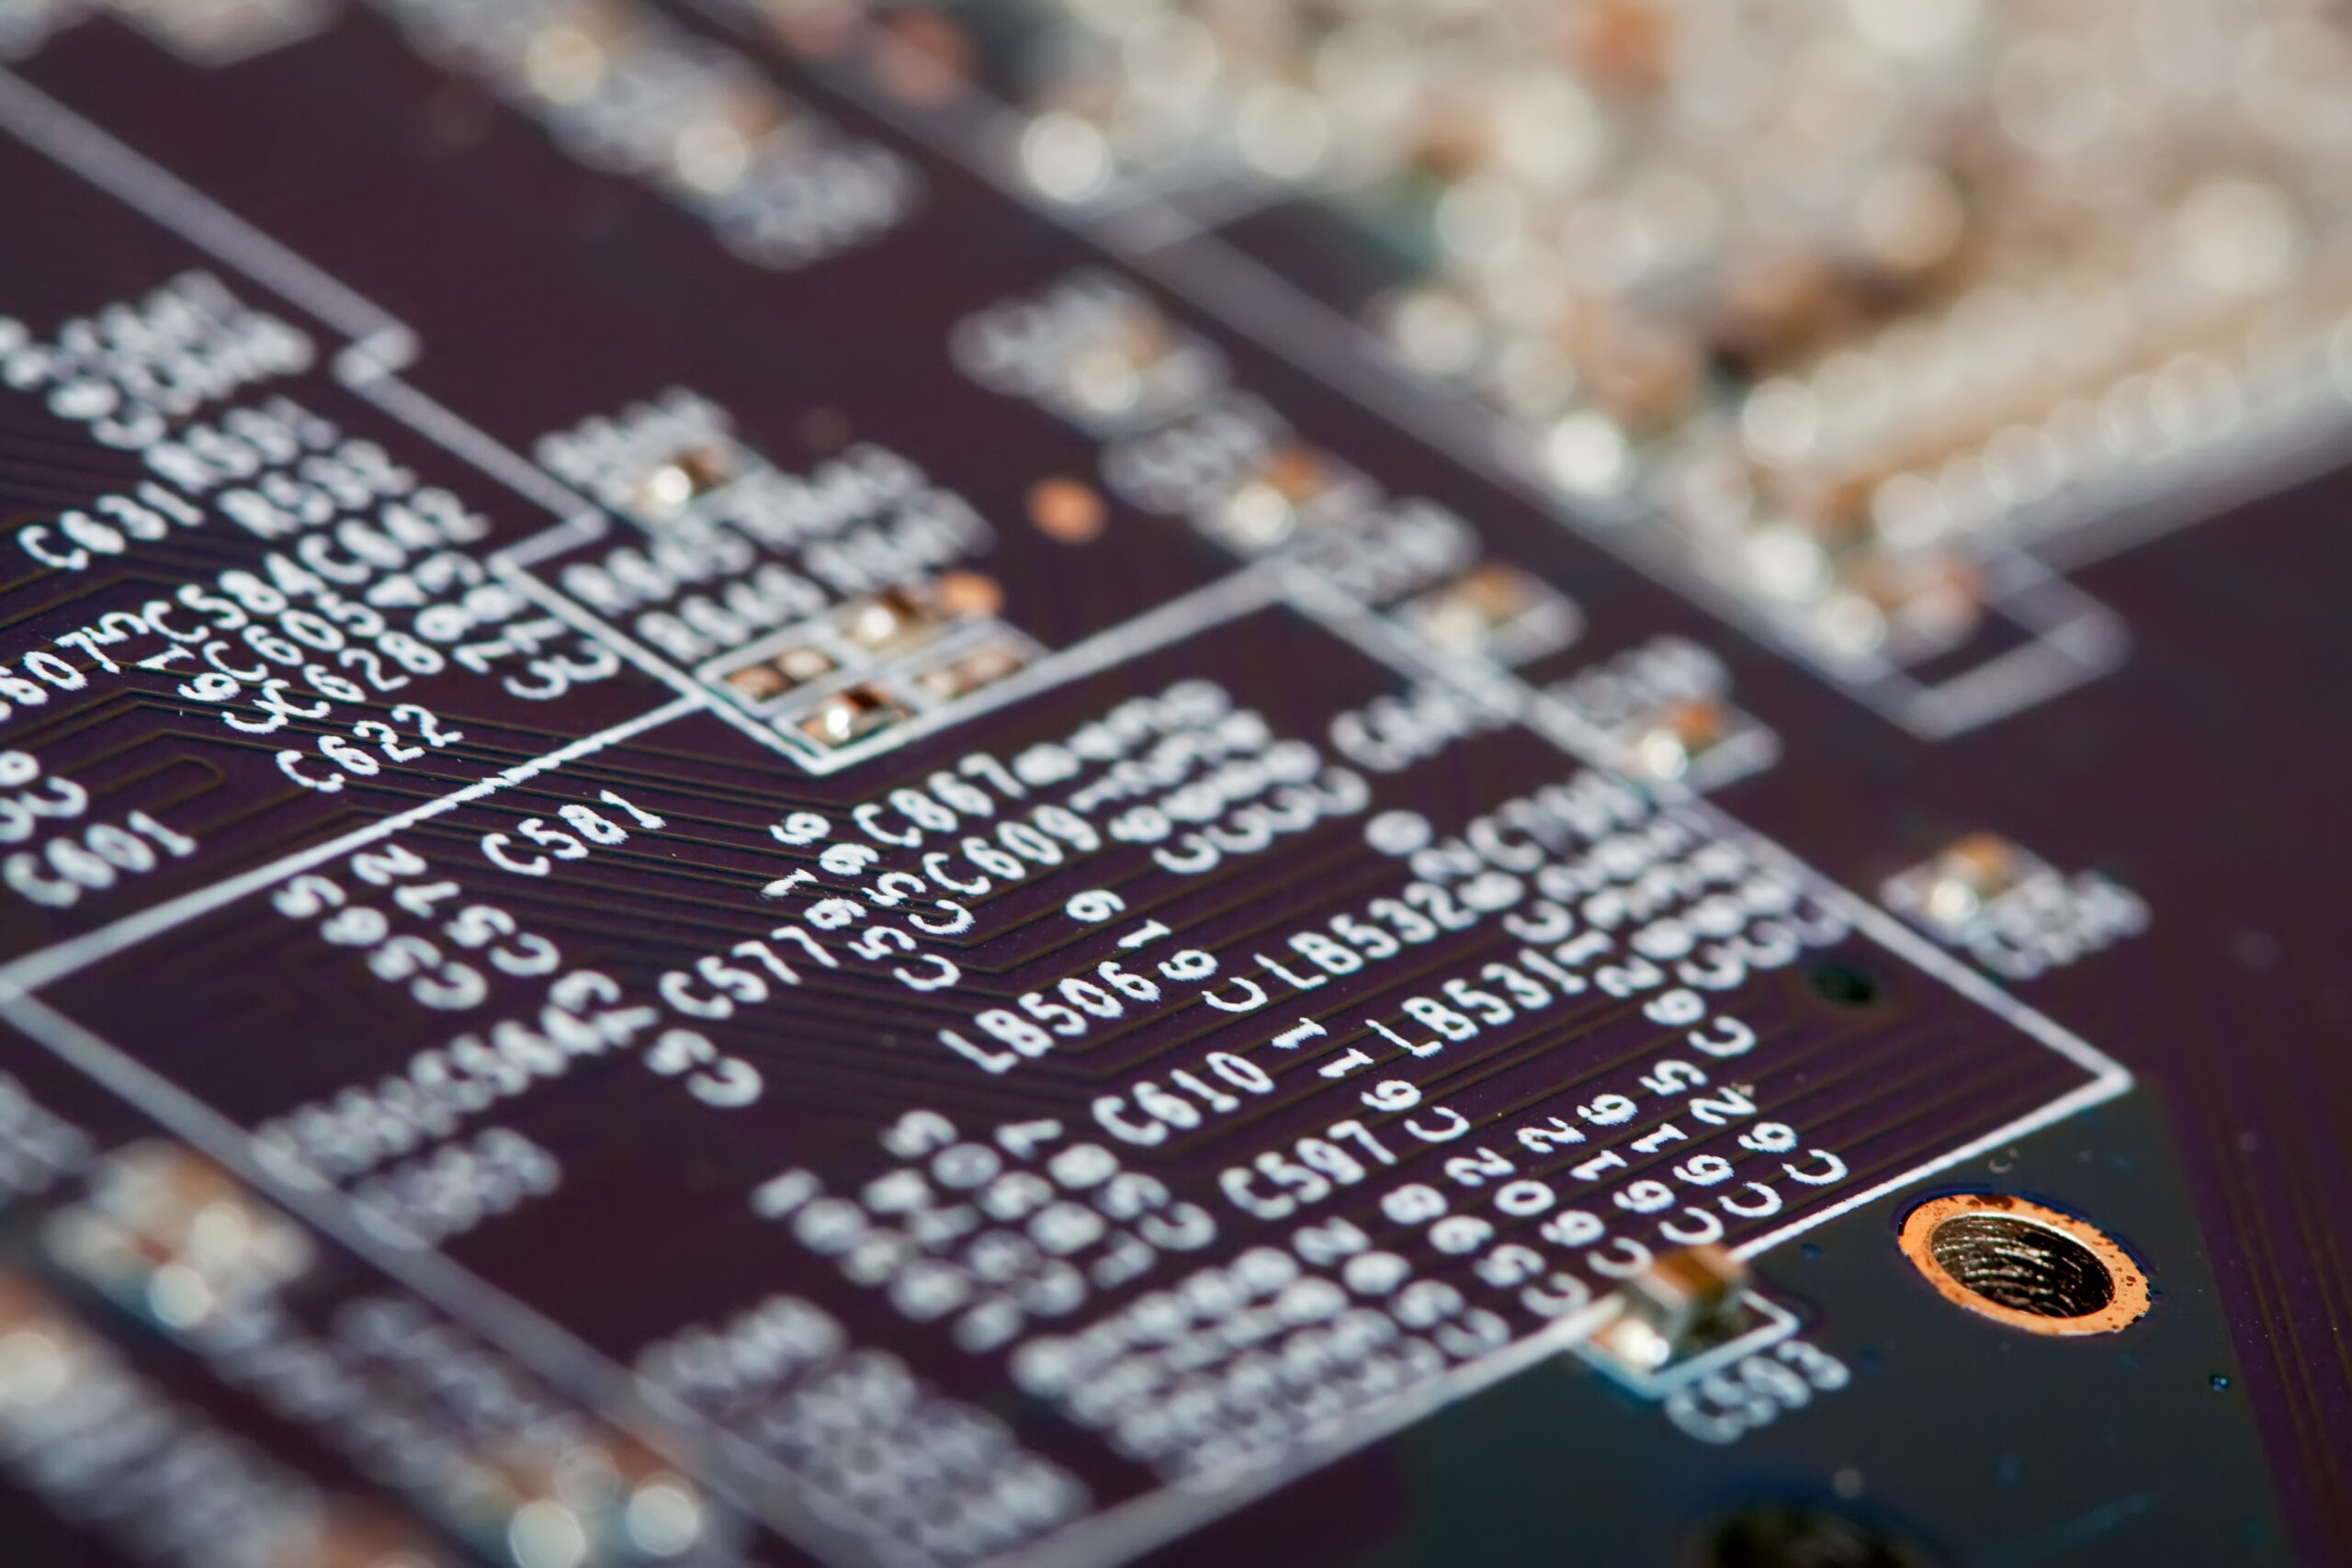 India approves investments totaling $15 billion for semiconductor plants.